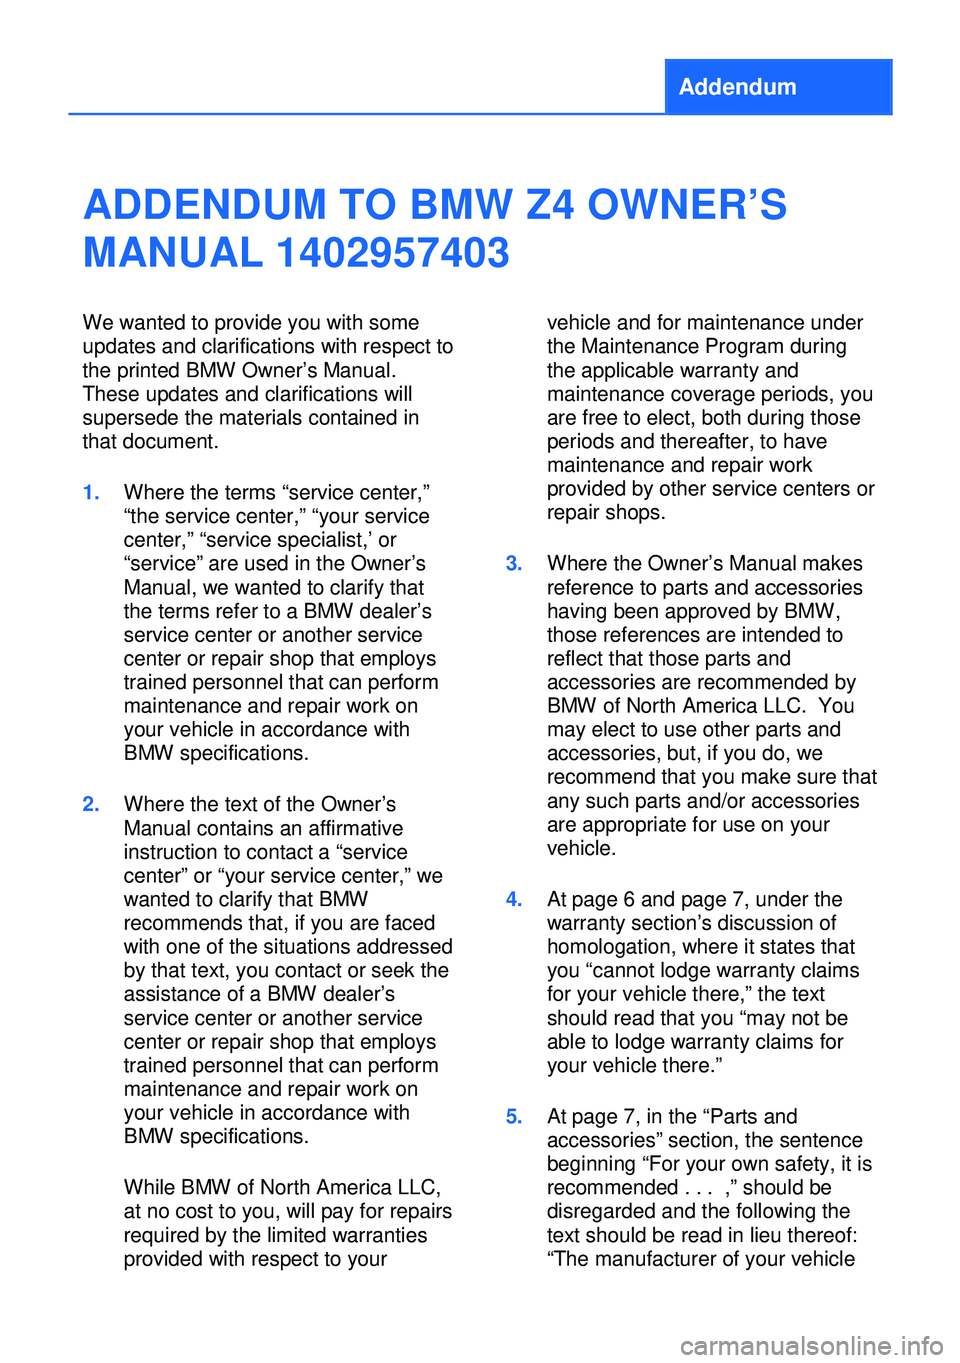 BMW Z4 SDRIVE35I 2016  Owners Manual Addendum
ADDENDUM TO BMW Z4 OWNER’S
MANUAL 1402957403
We wanted to provide you with some
updates and clarifications with respect to
the printed BMW Owner’s Manual.
These updates and clarifications